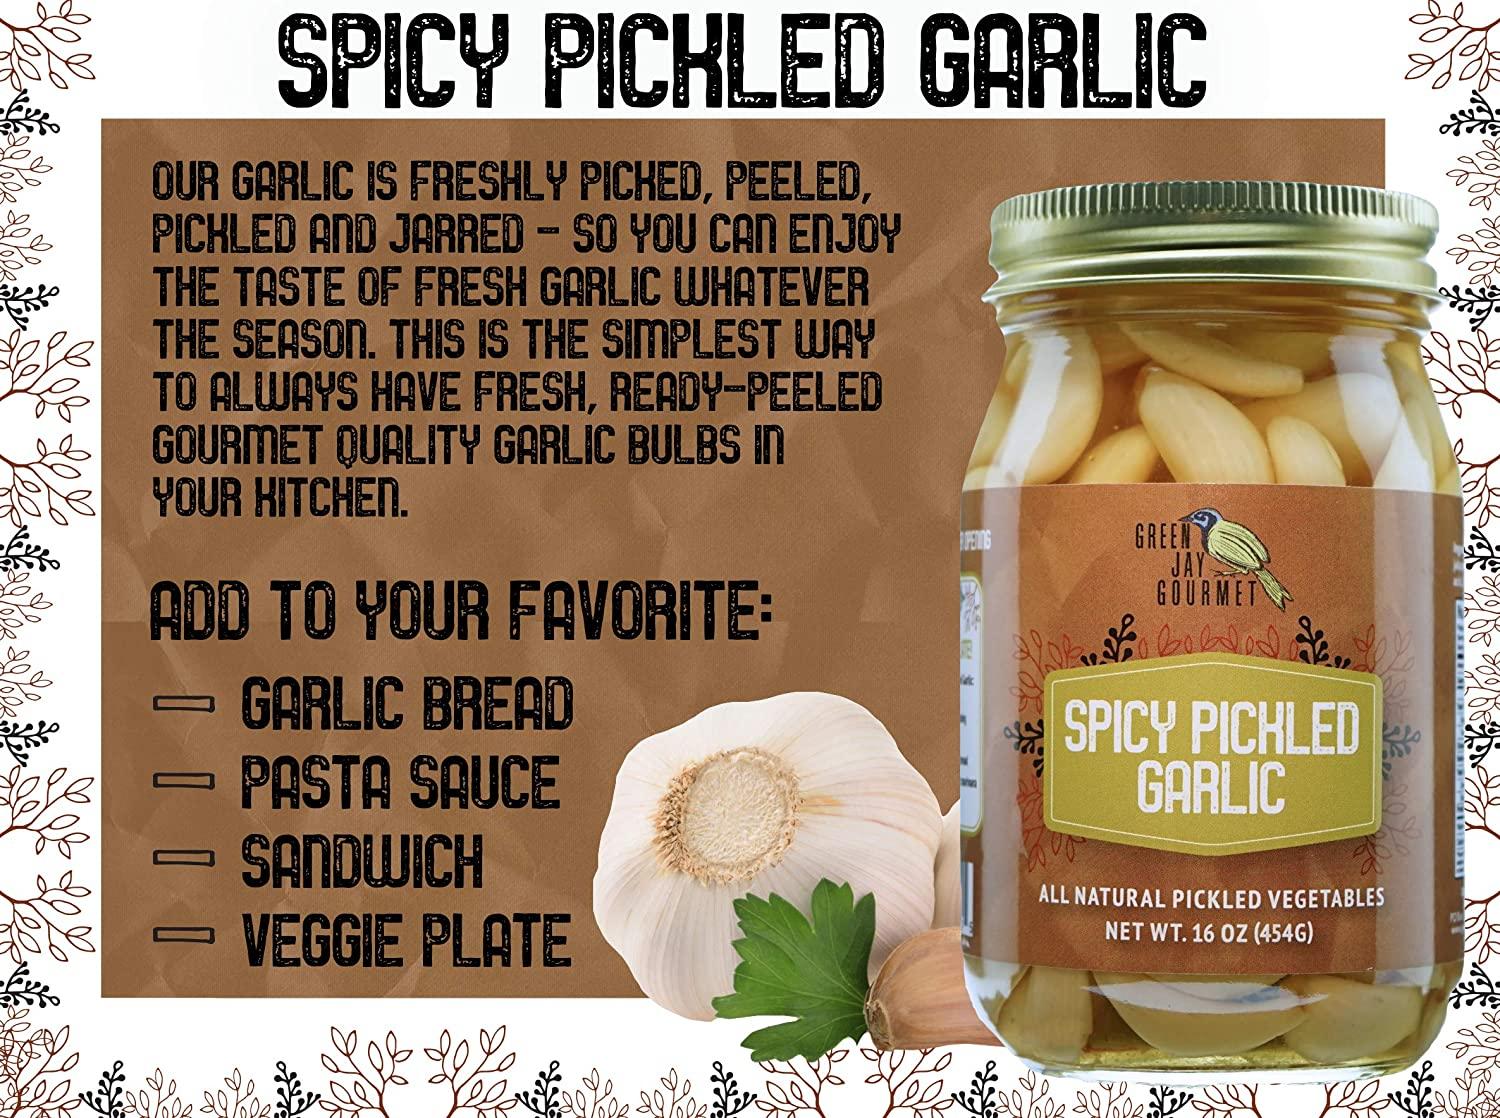 Green Jay Gourmet Pickled Garlic Cloves in a Jar - Spicy Pickled